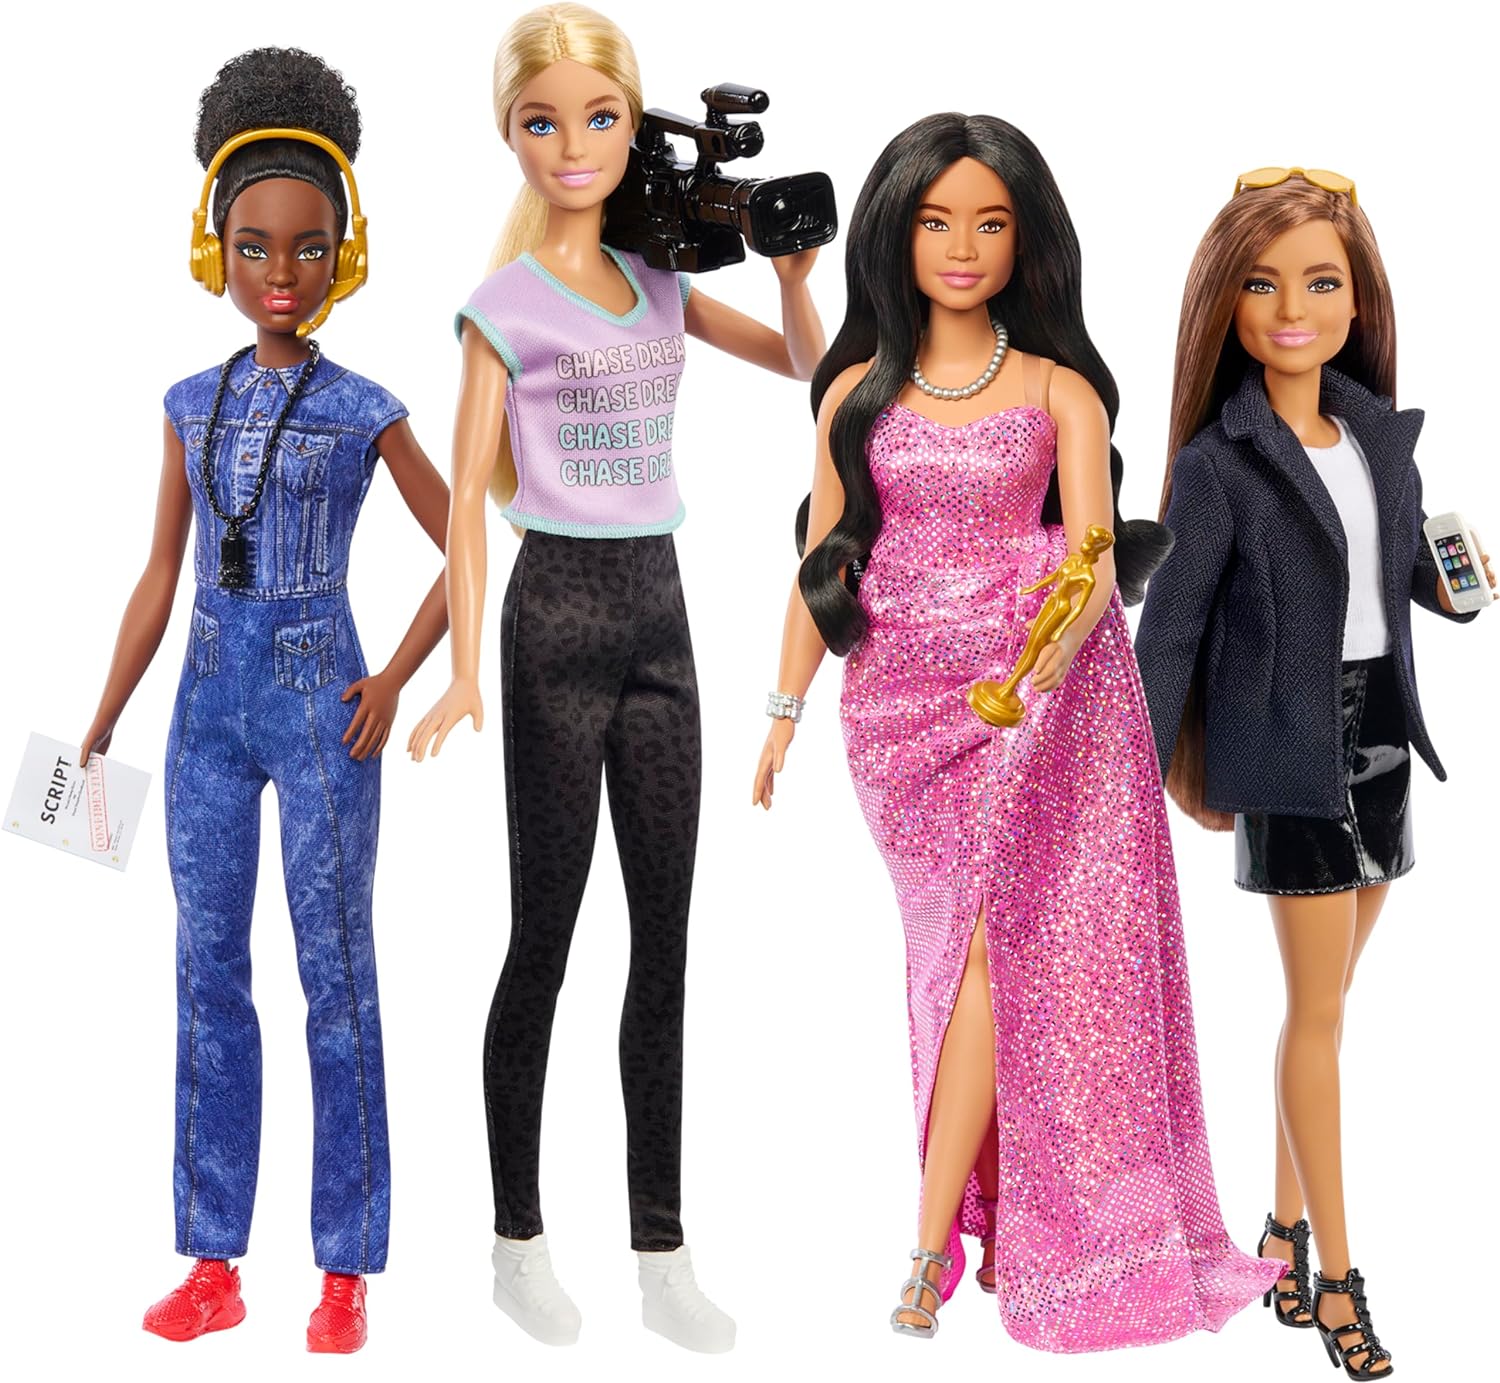 Barbie Careers Set of 4 Dolls & Accessories, Women in Film with Studio Executive, Director, Cinematographer & Movie Star in Removable Looks